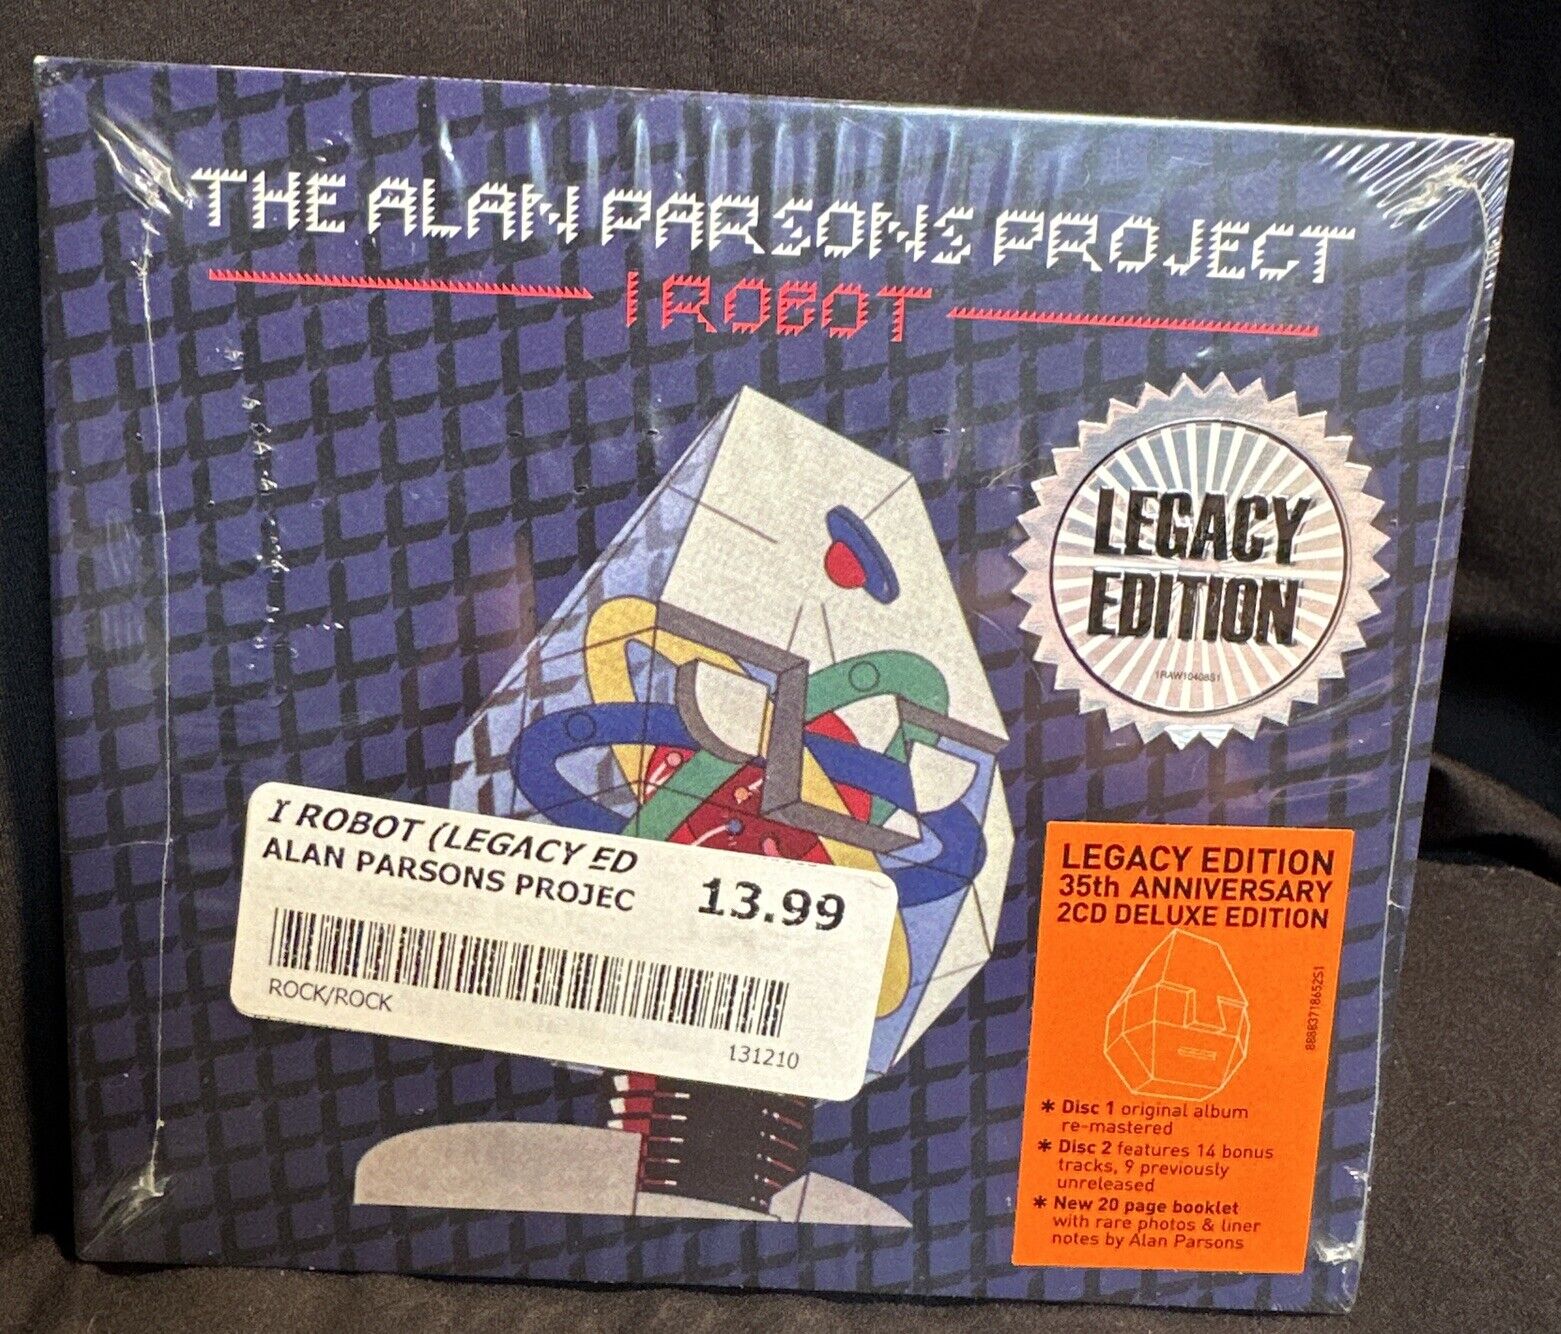 THE ALAN PARSONS PROJECT - I ROBOT (LEGACY EDITION) 2 CD POP